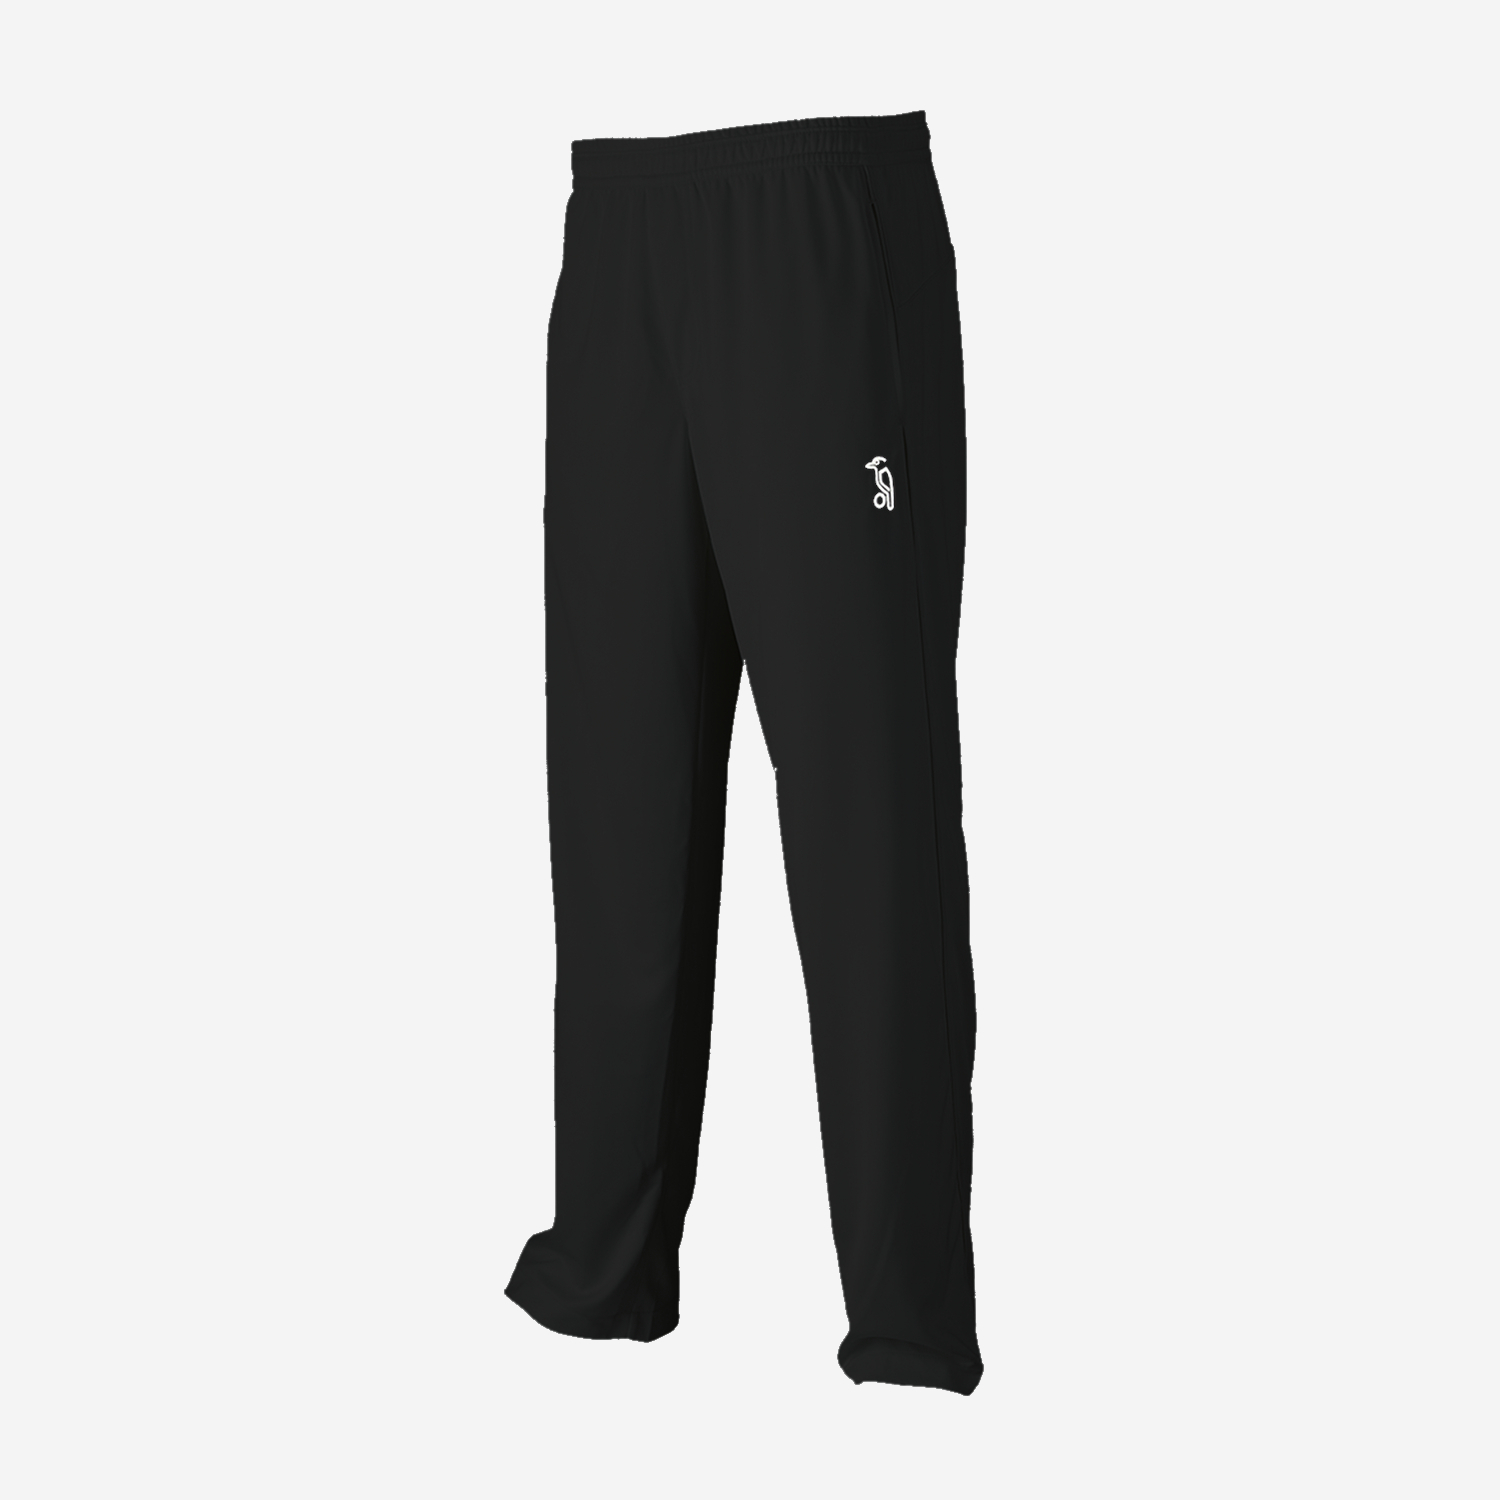 Colored Cricket Team Trousers | Cricket team, Sports team uniforms, Cricket  trousers